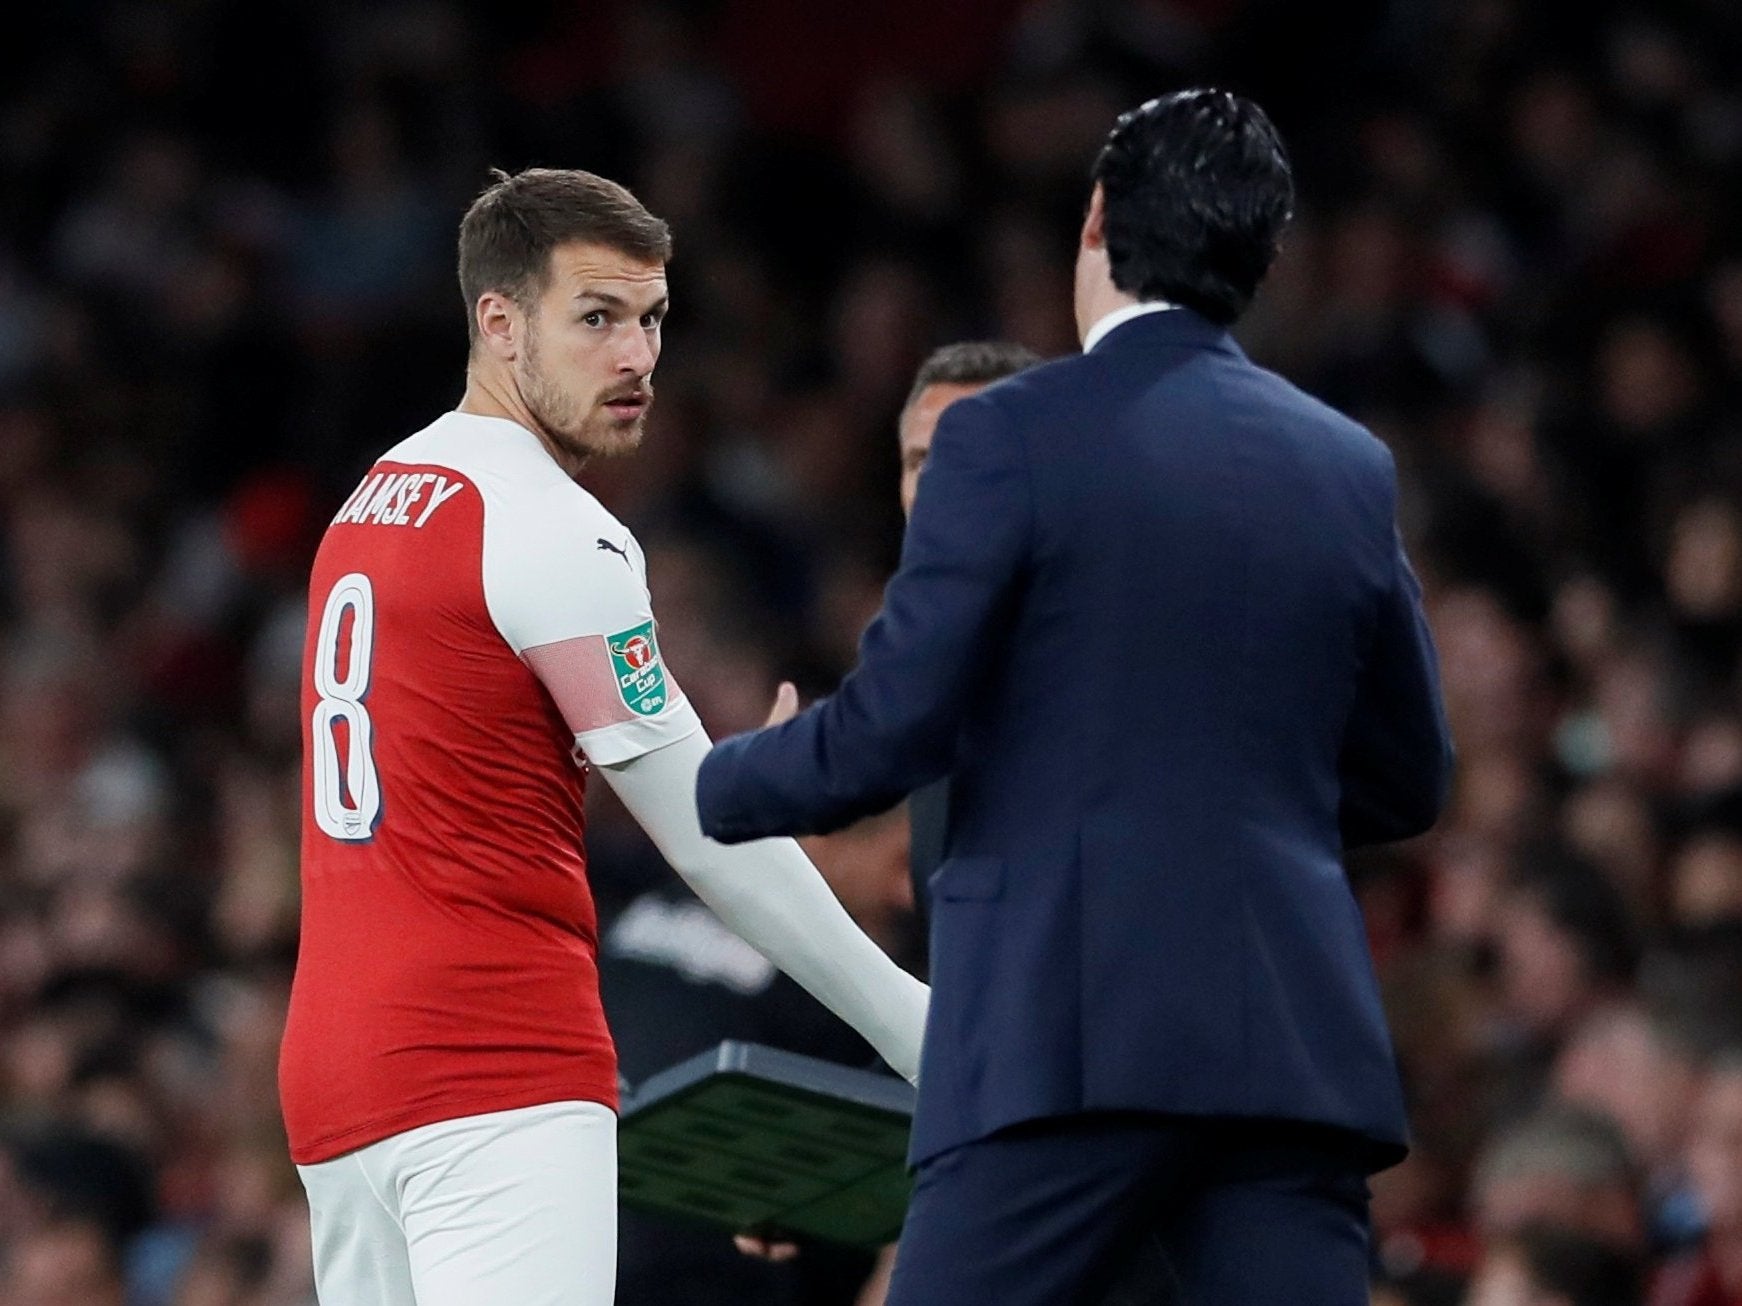 Aaron Ramsey is expected to leave Arsenal at the end of the season